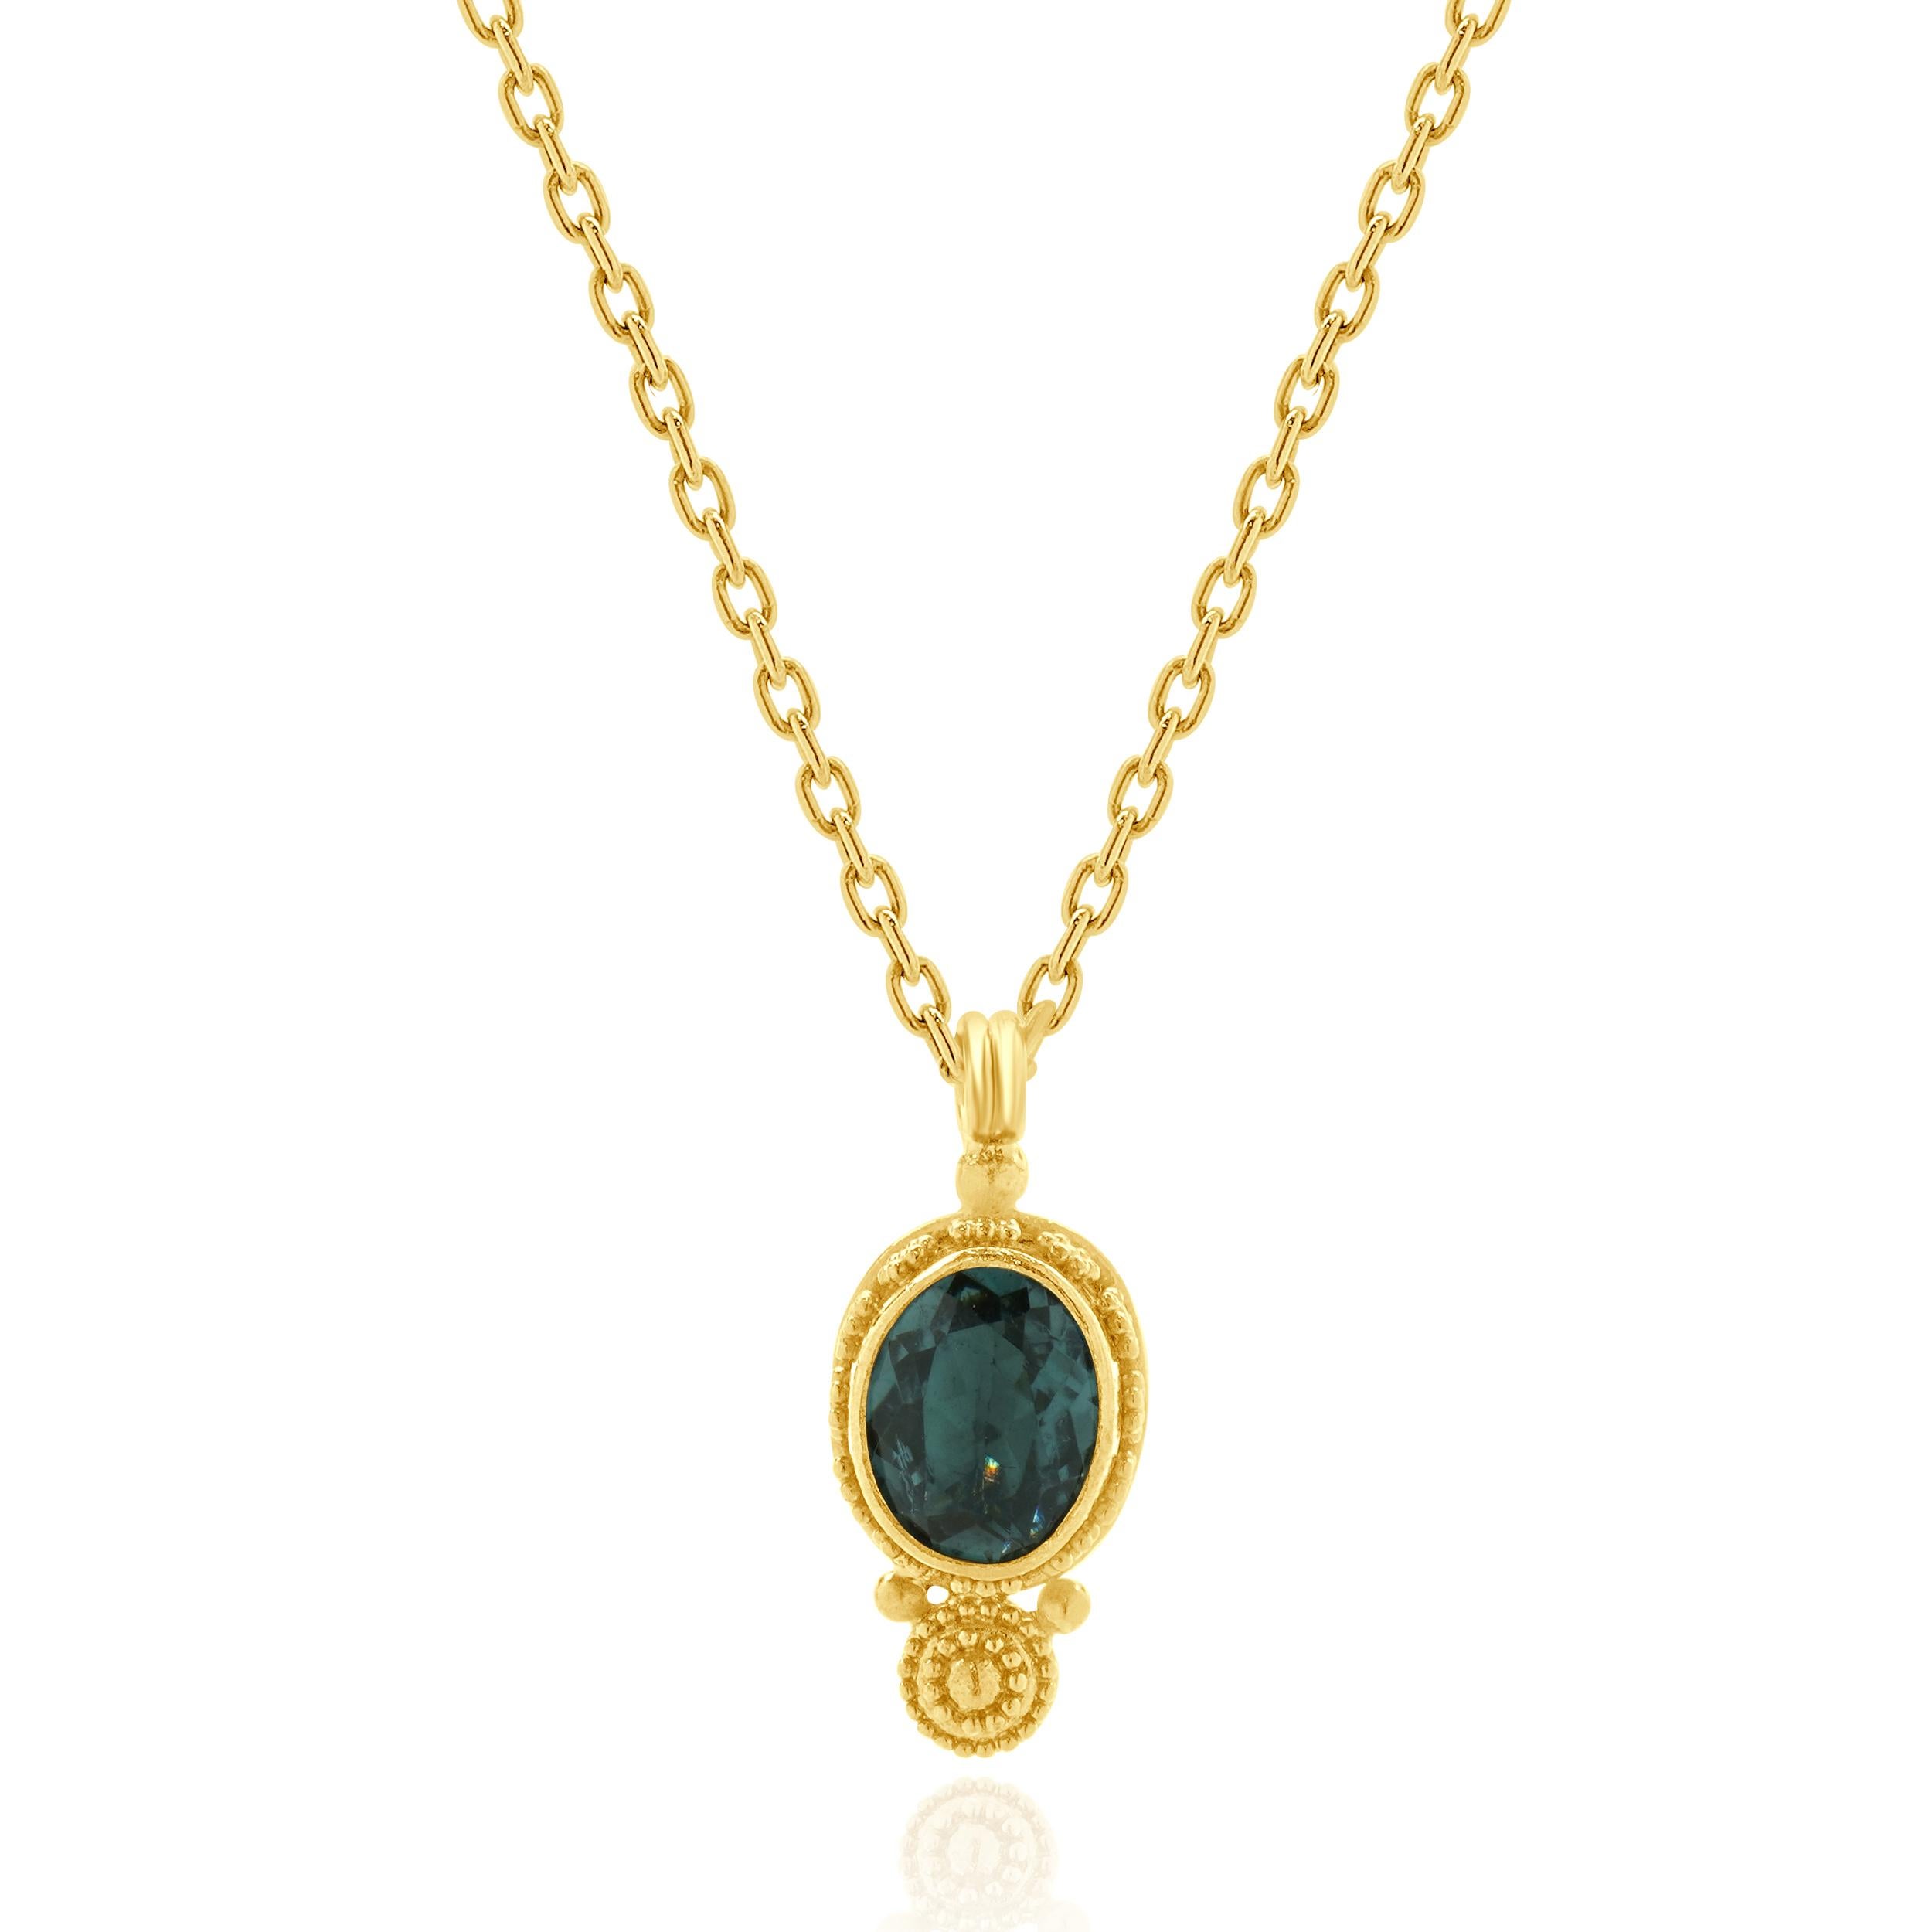 Designer: custom
Material: 22/14K yellow gold
Tourmaline: 1 oval cut = 2.00ct
Dimensions: necklace measures 15.5-inches in length
Weight: 5.61 grams
